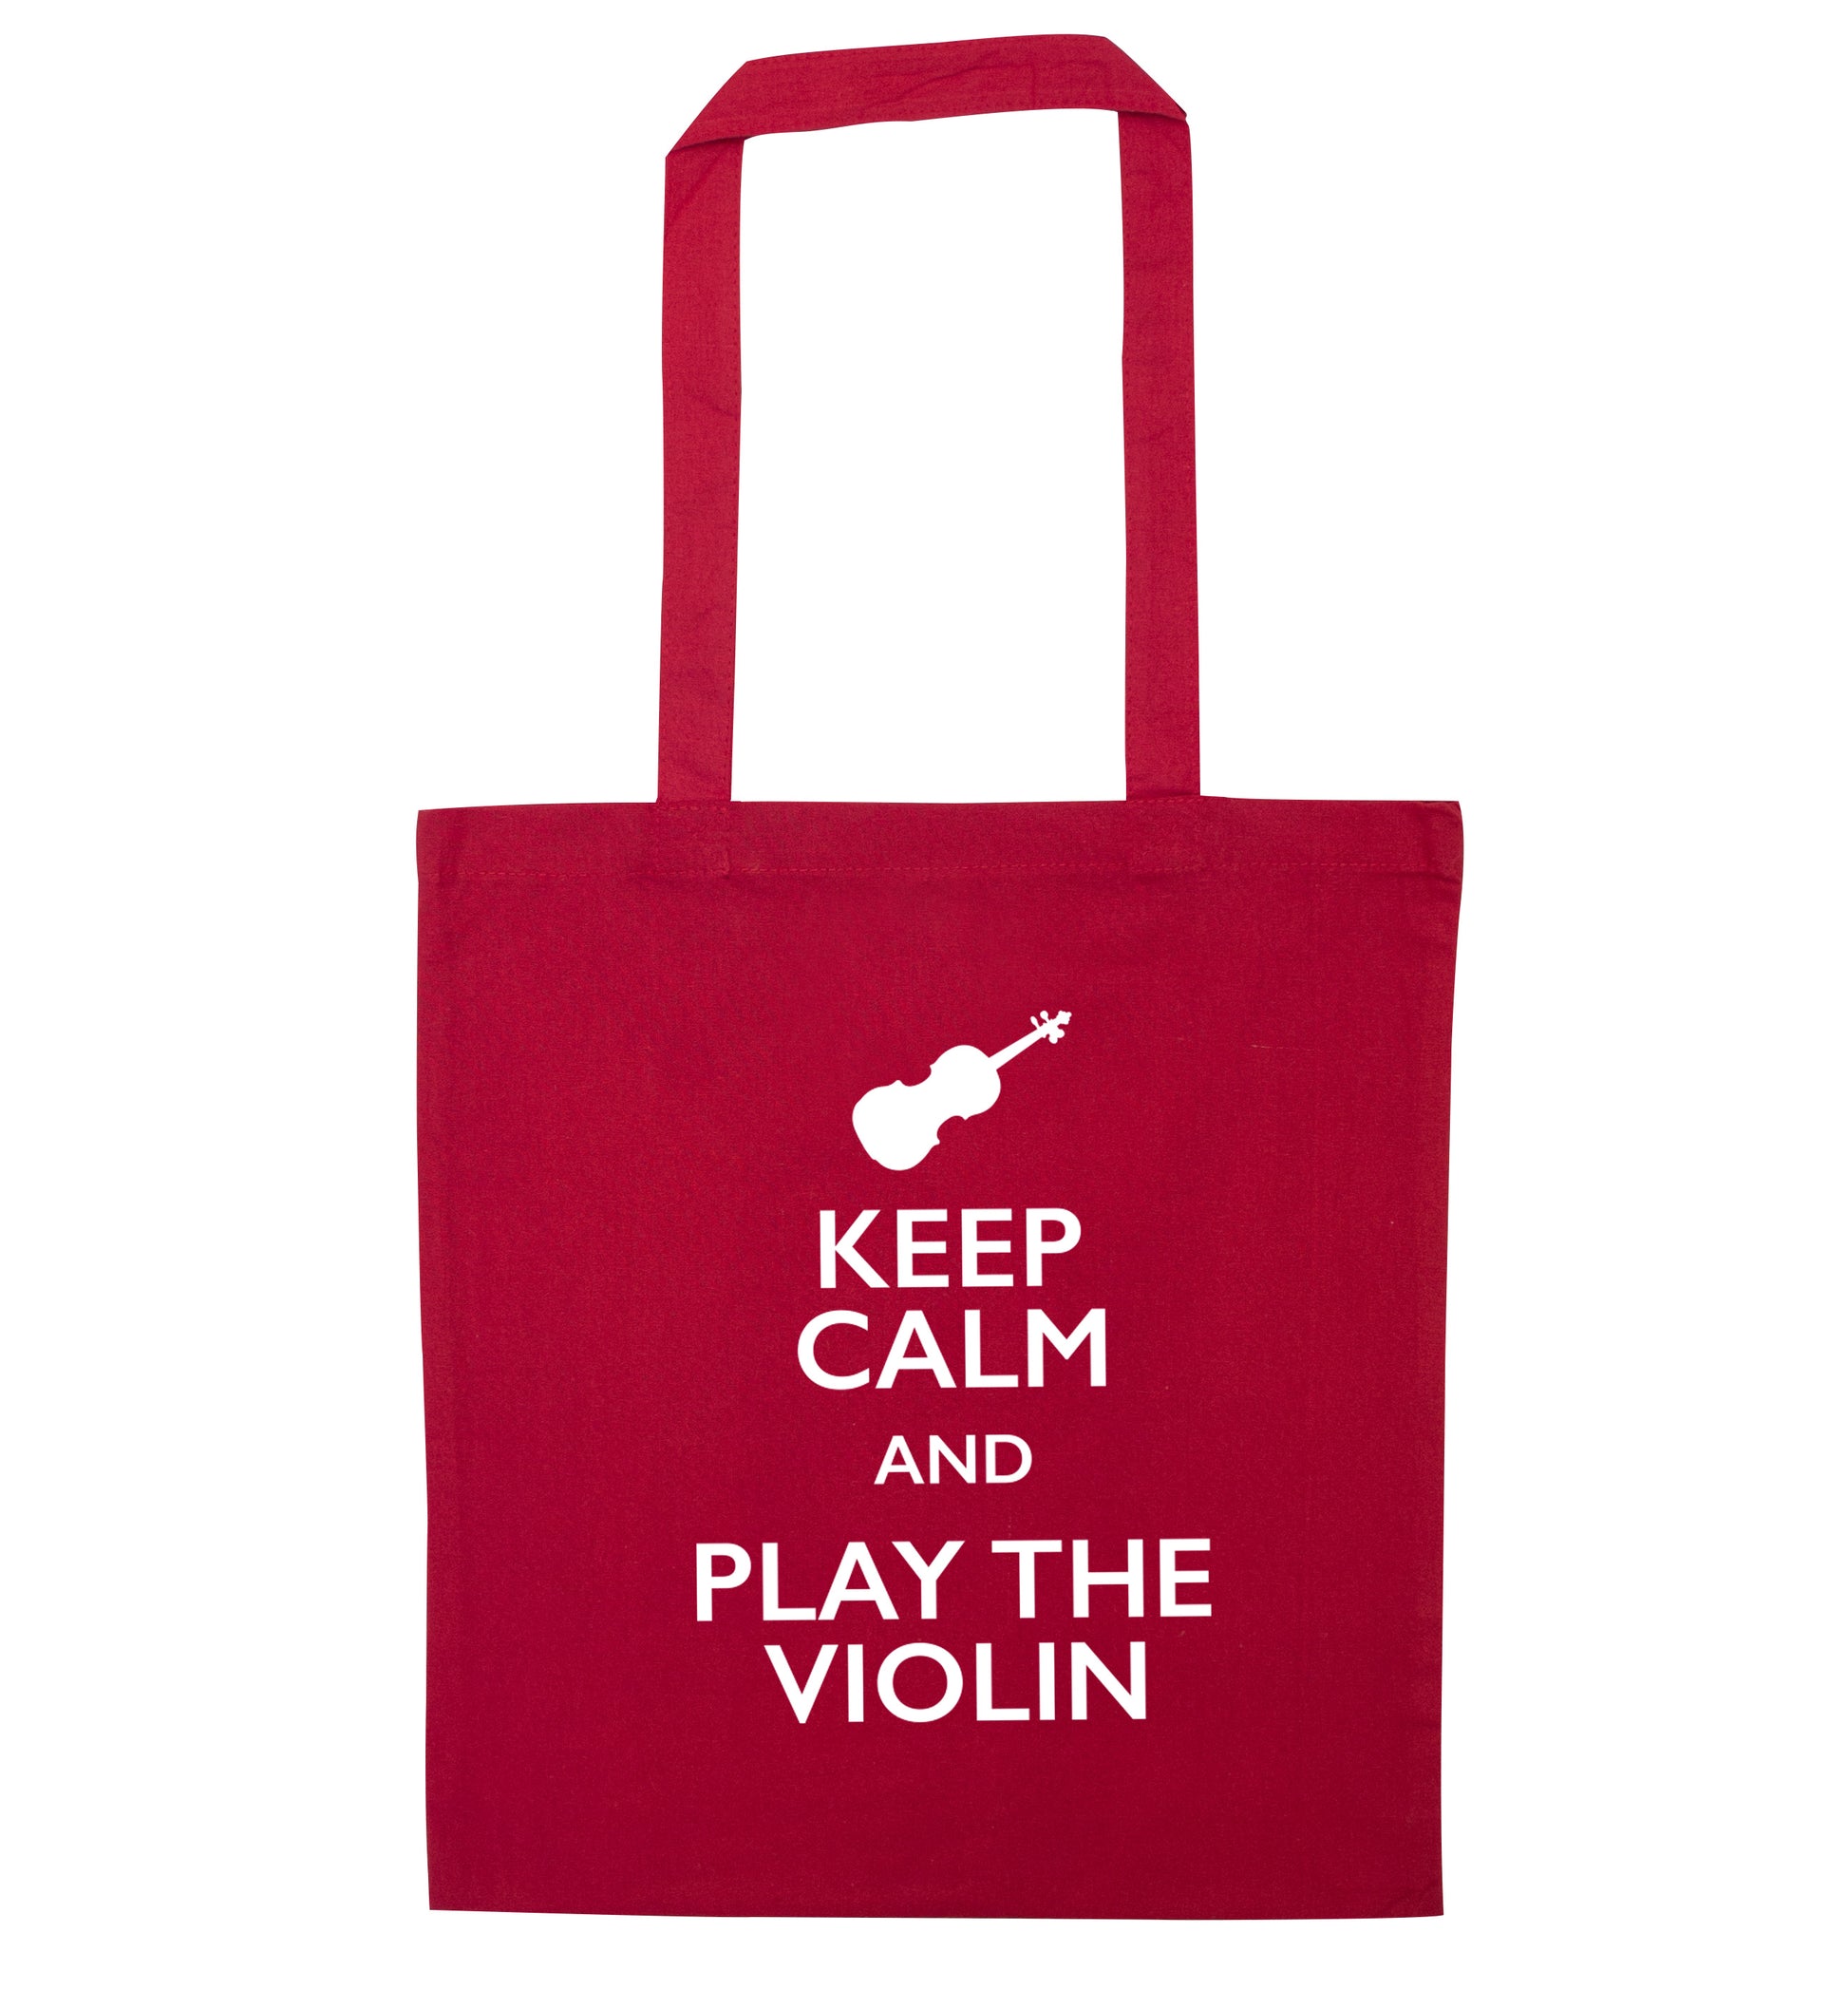 Keep calm and play the violin red tote bag